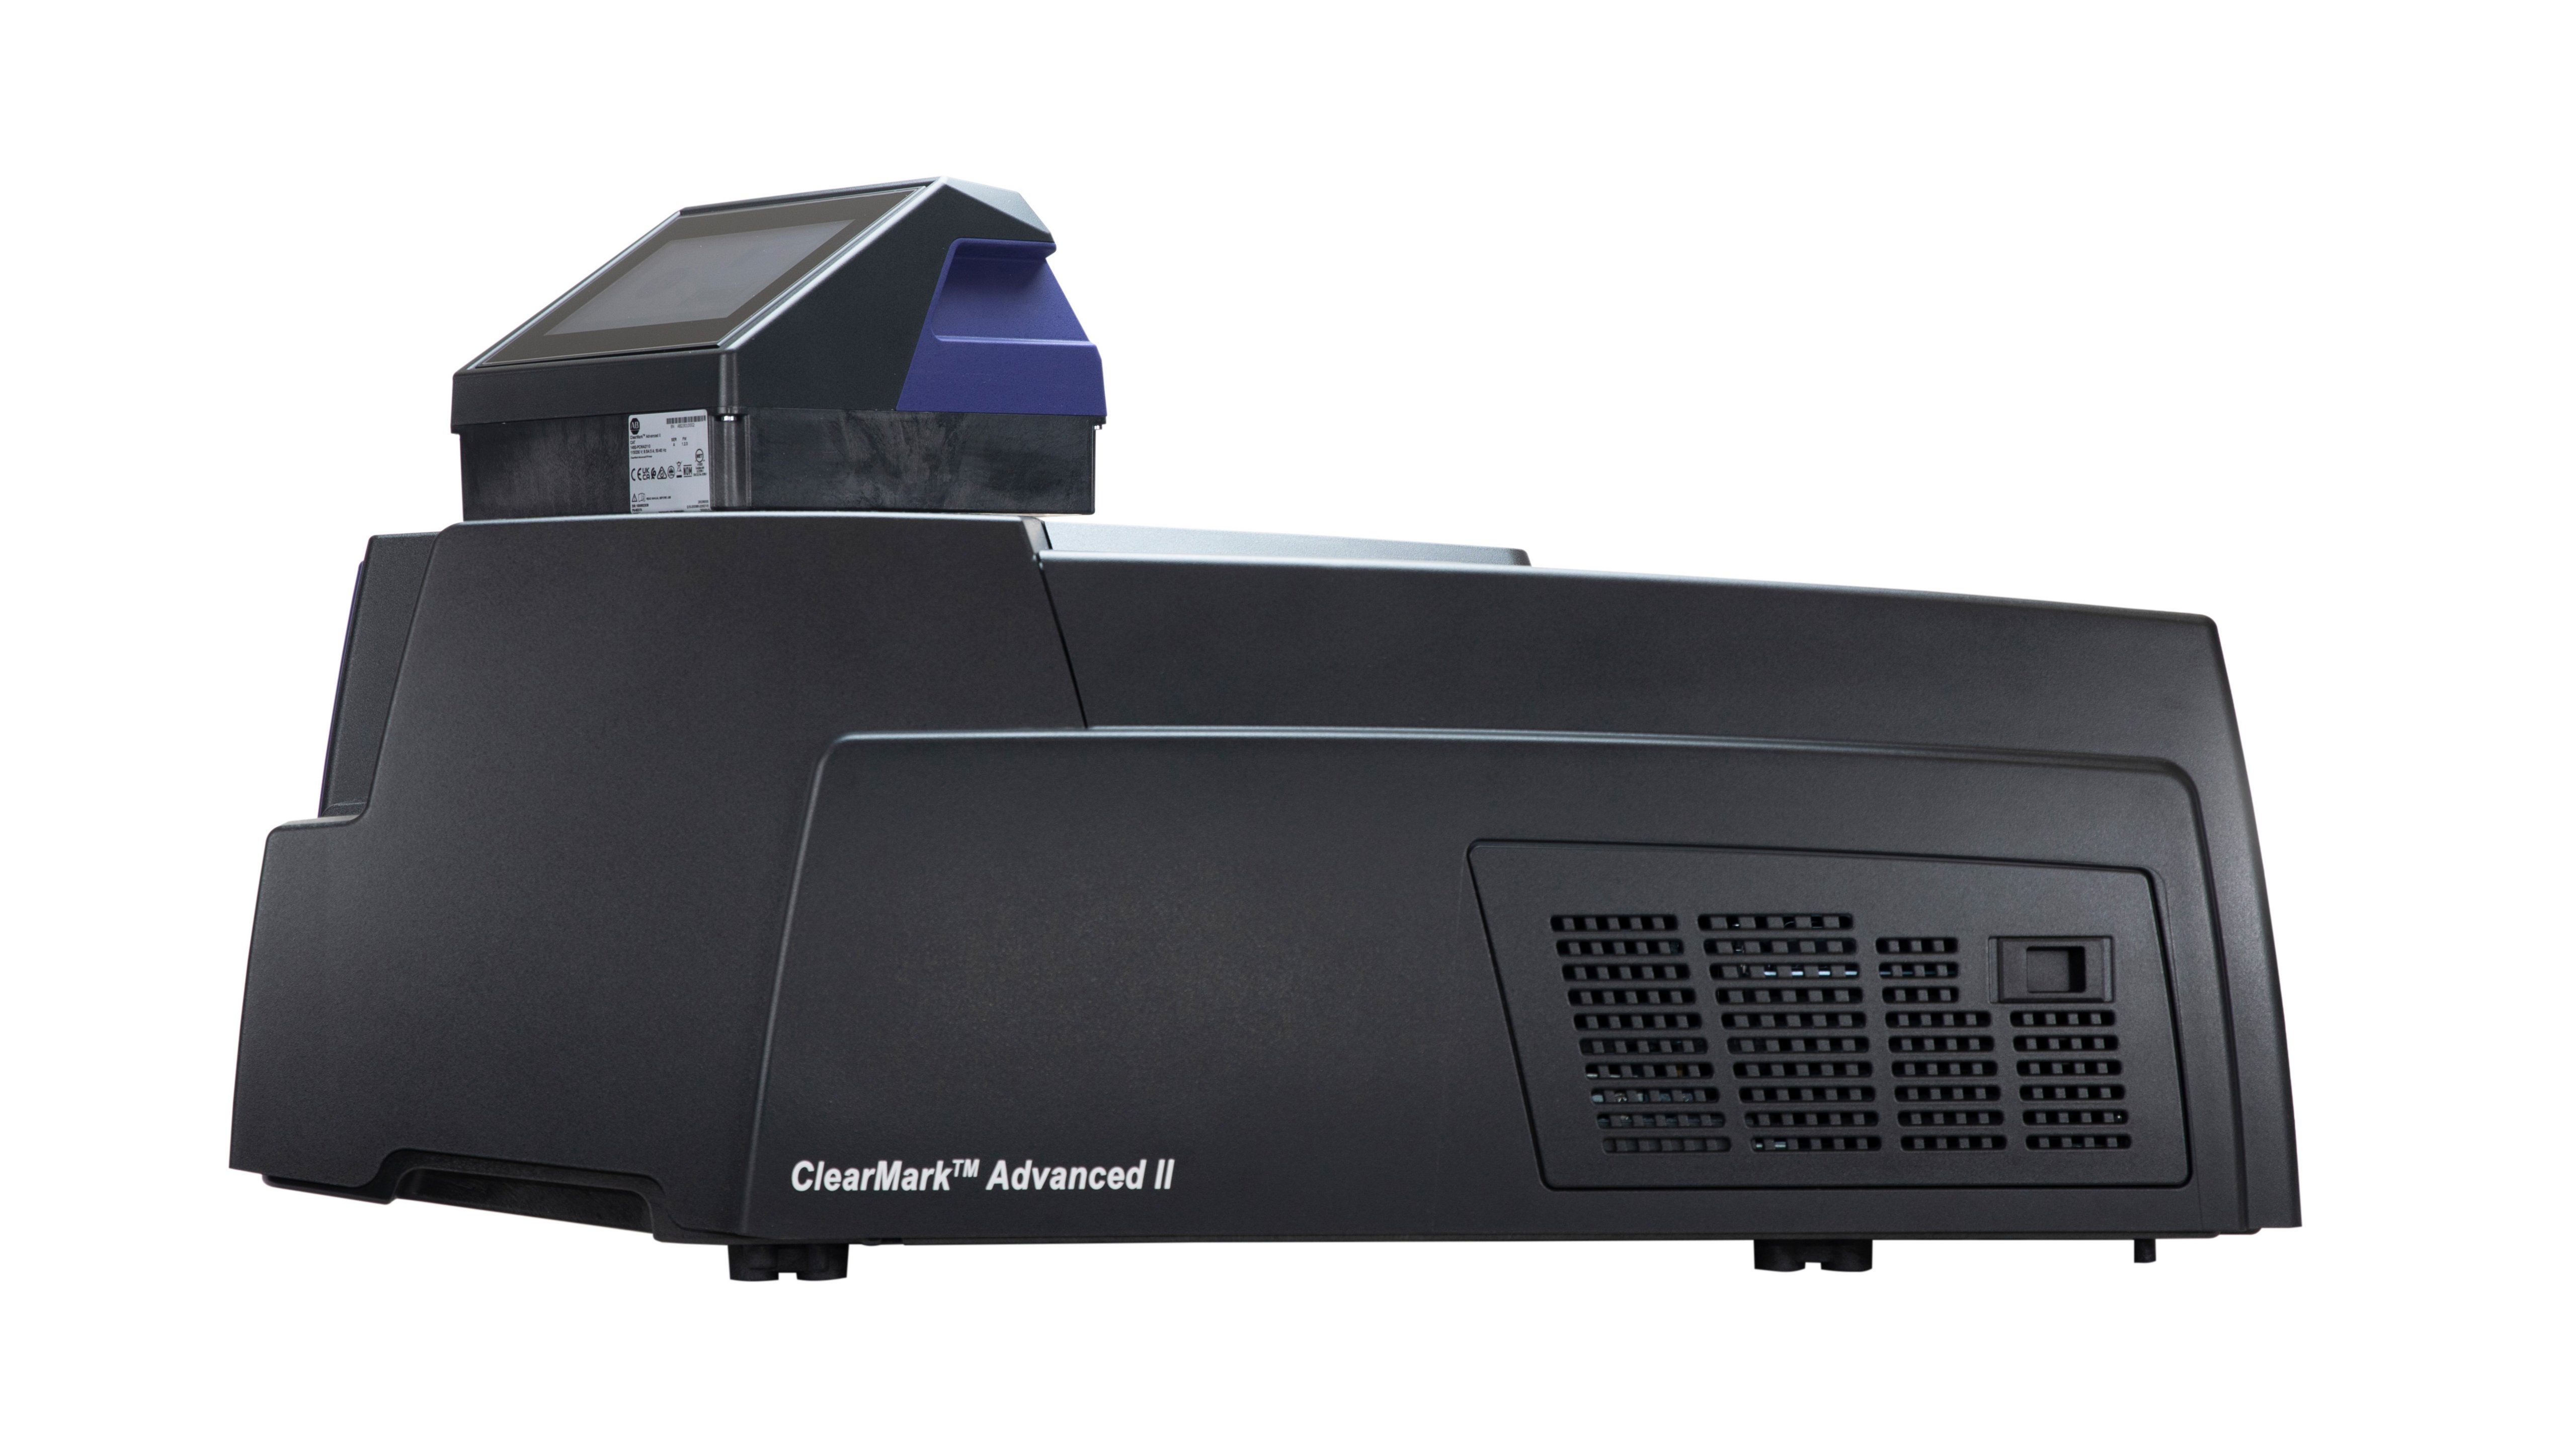 Black ClearMark Advanced II Marking Printer with rotating touch panel turned